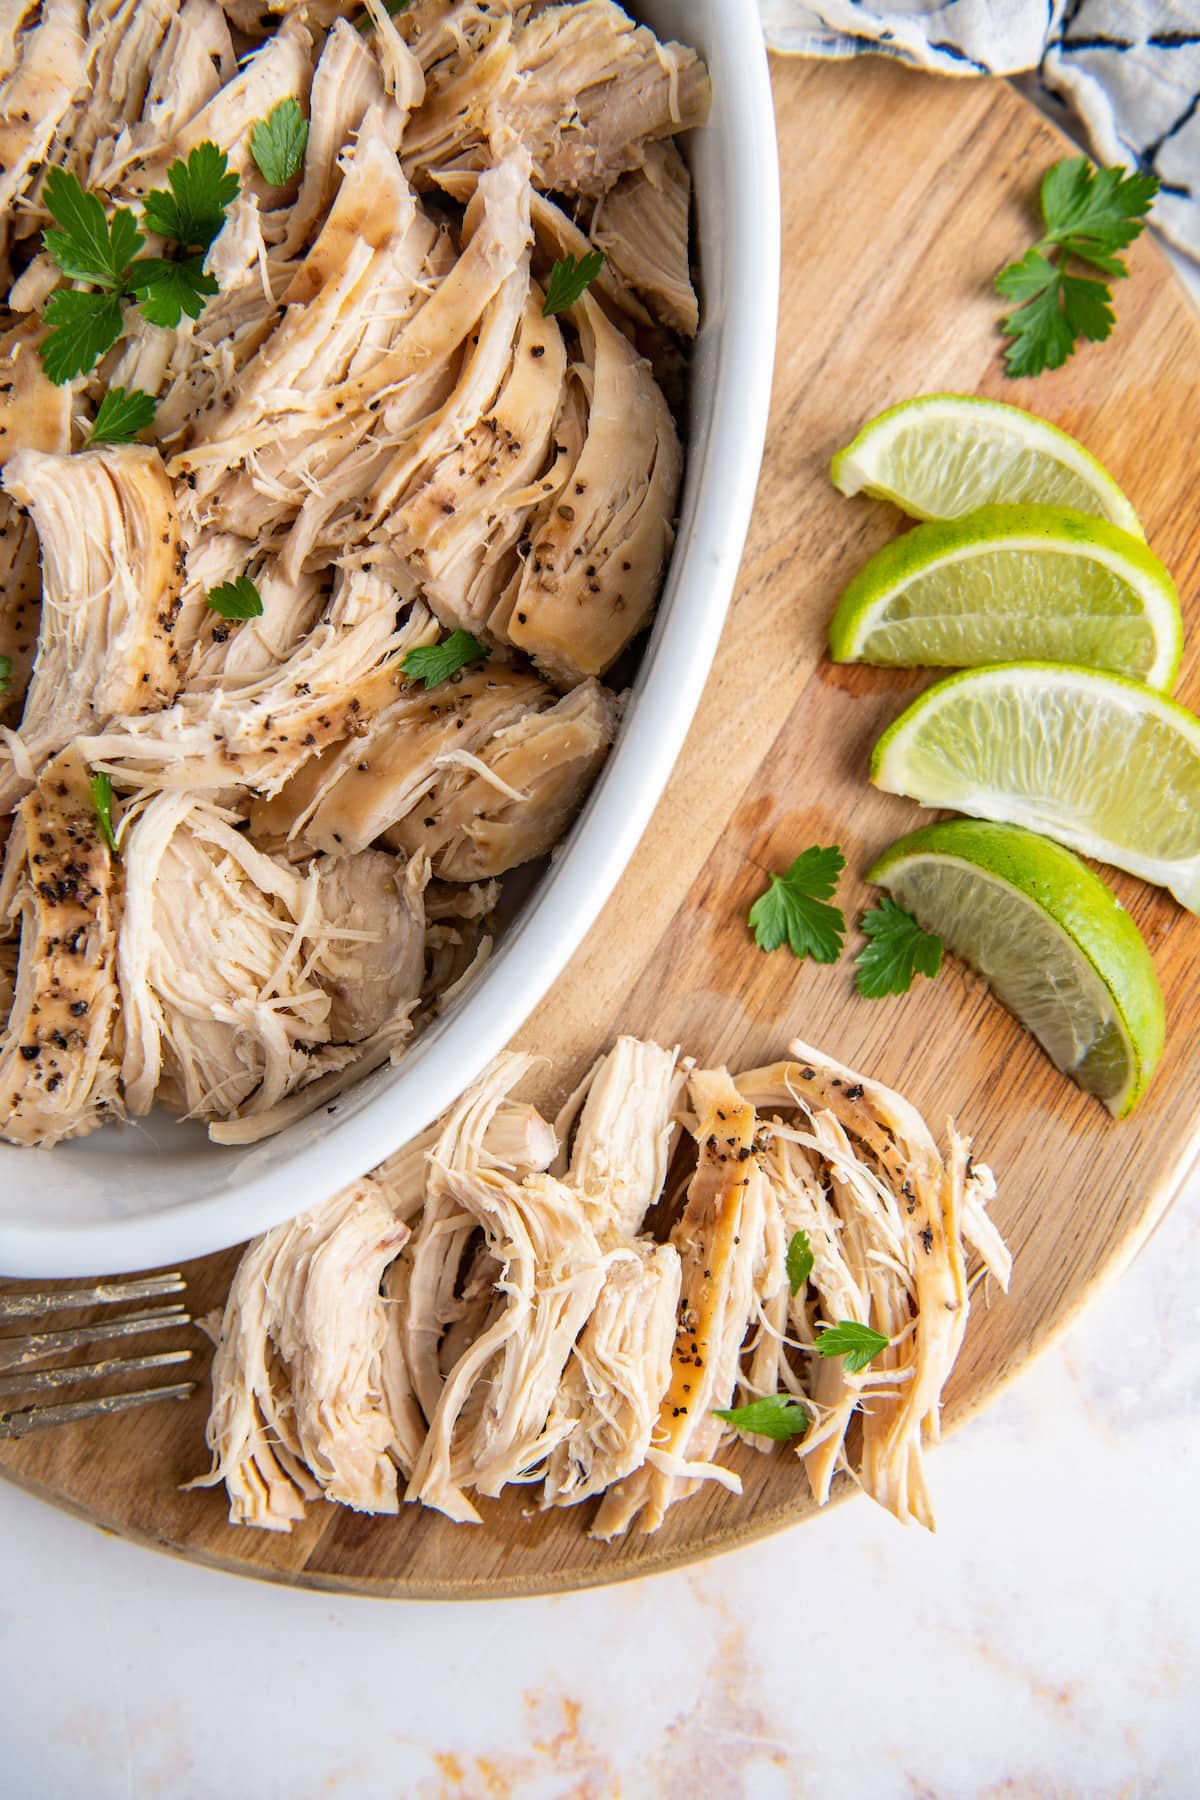 Shredded chicken flavored with lime and cilantro.